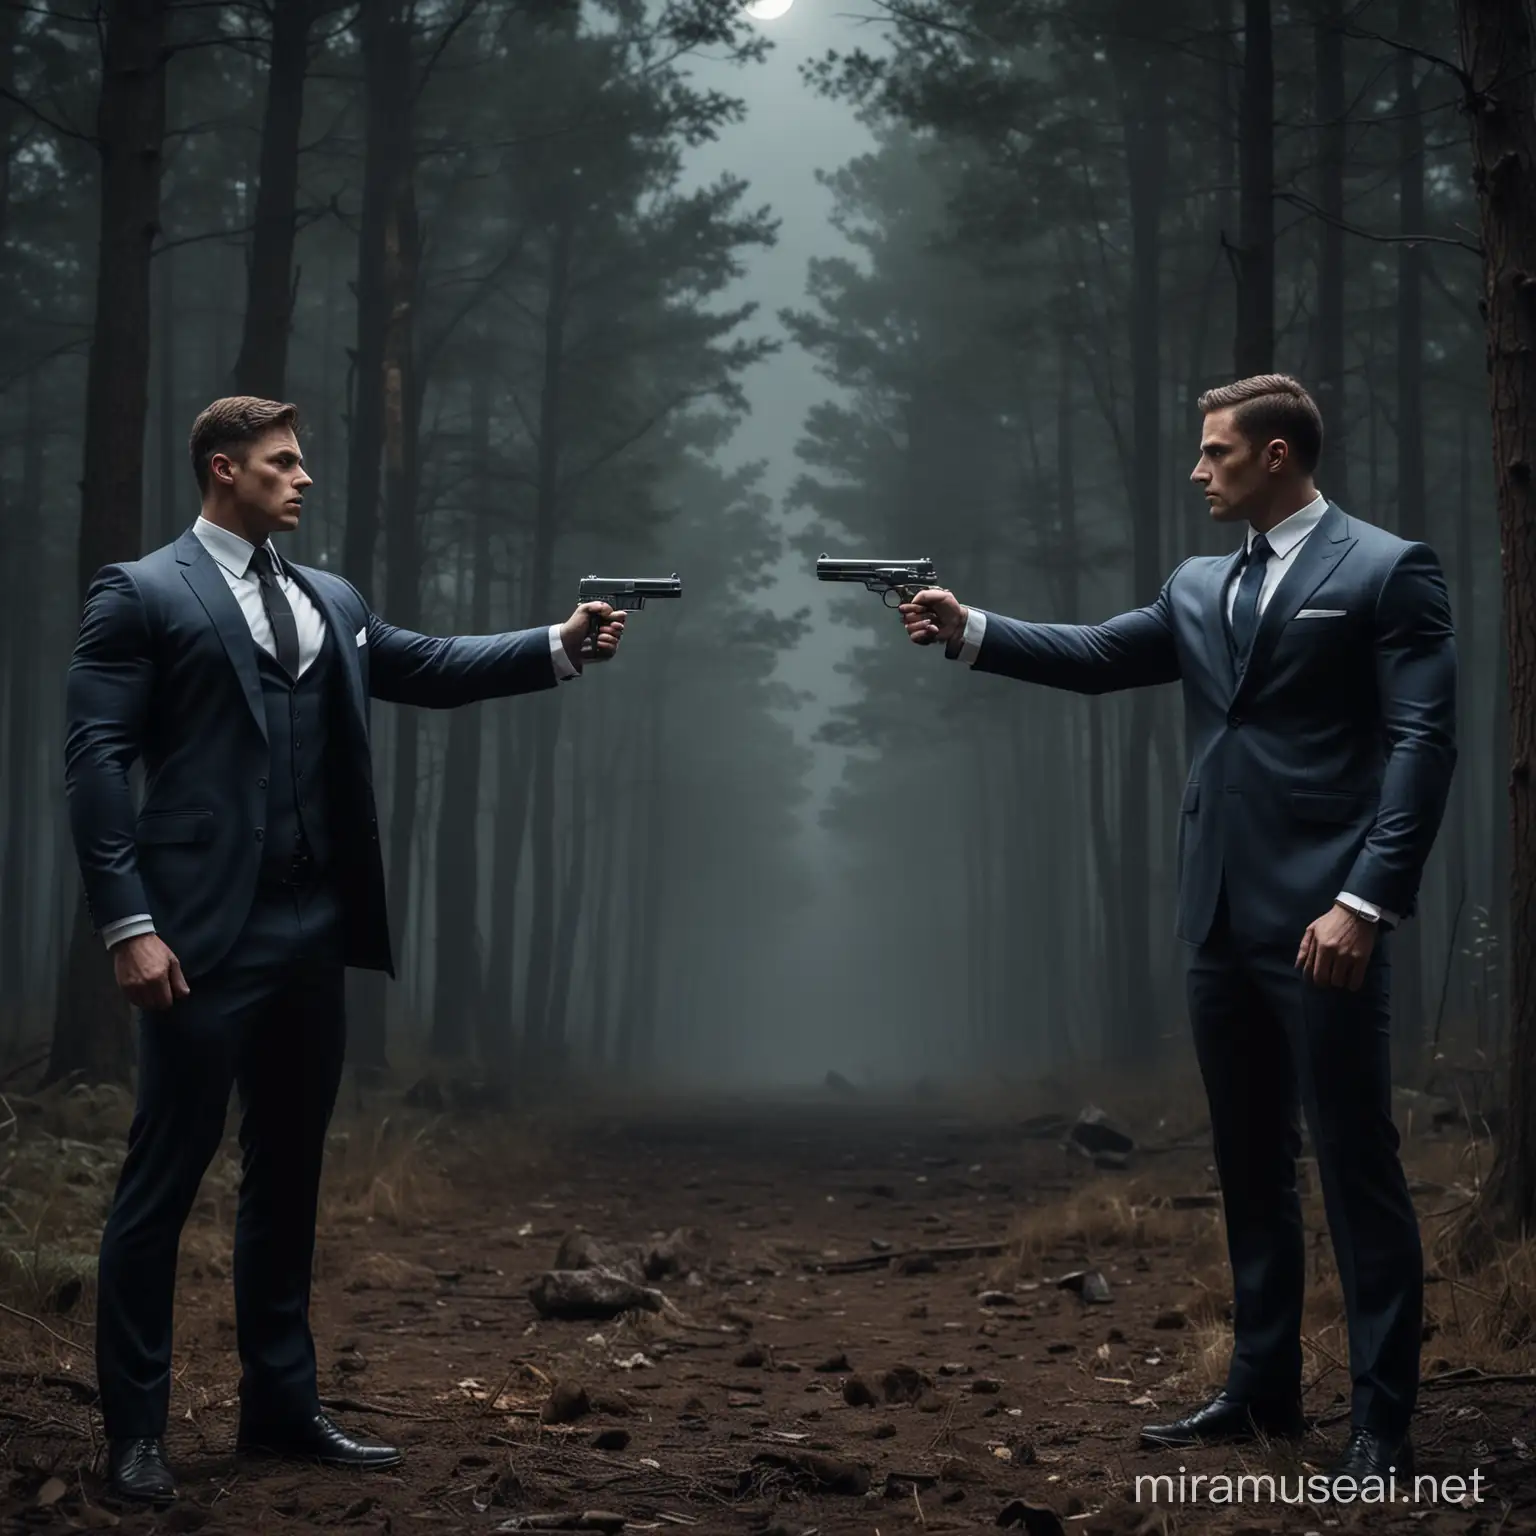 2 bulked muscular man dressed in a suits pointing a guns at one another,  The background  is of a dark forest during midnight with only moonlight shining over the scene 